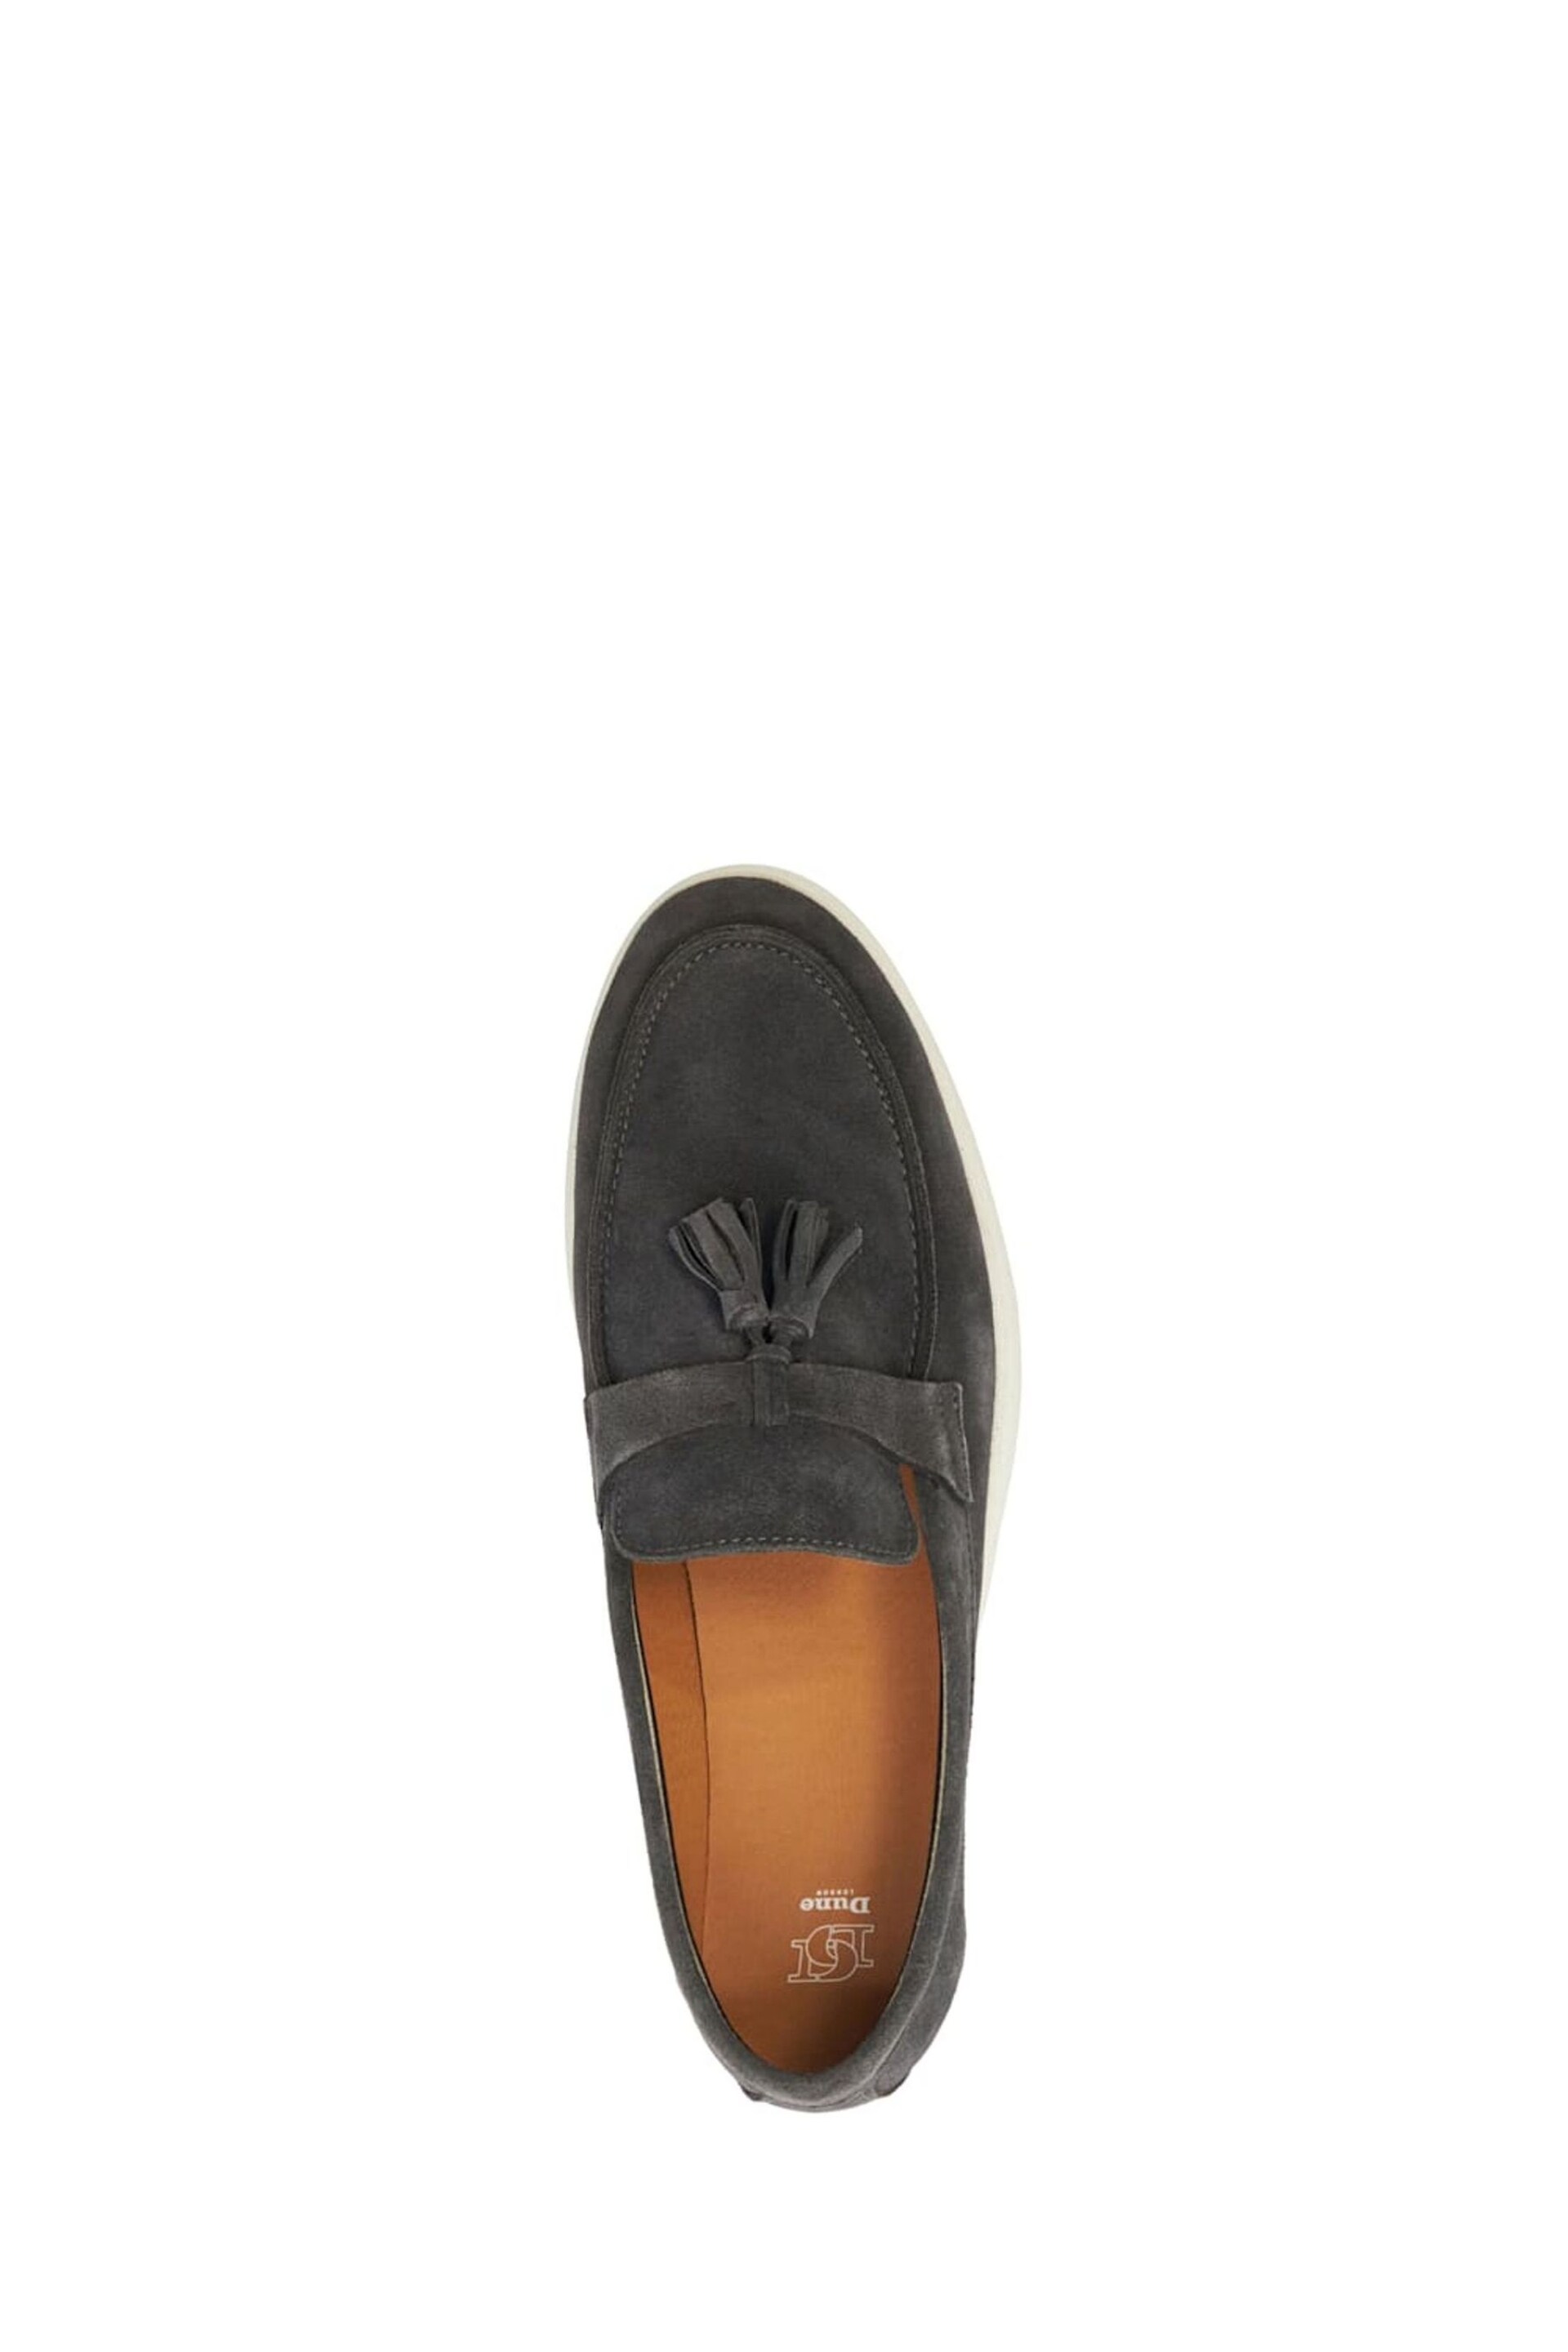 Dune London Grey Believes Top Stitch Tassel Loafers - Image 5 of 6